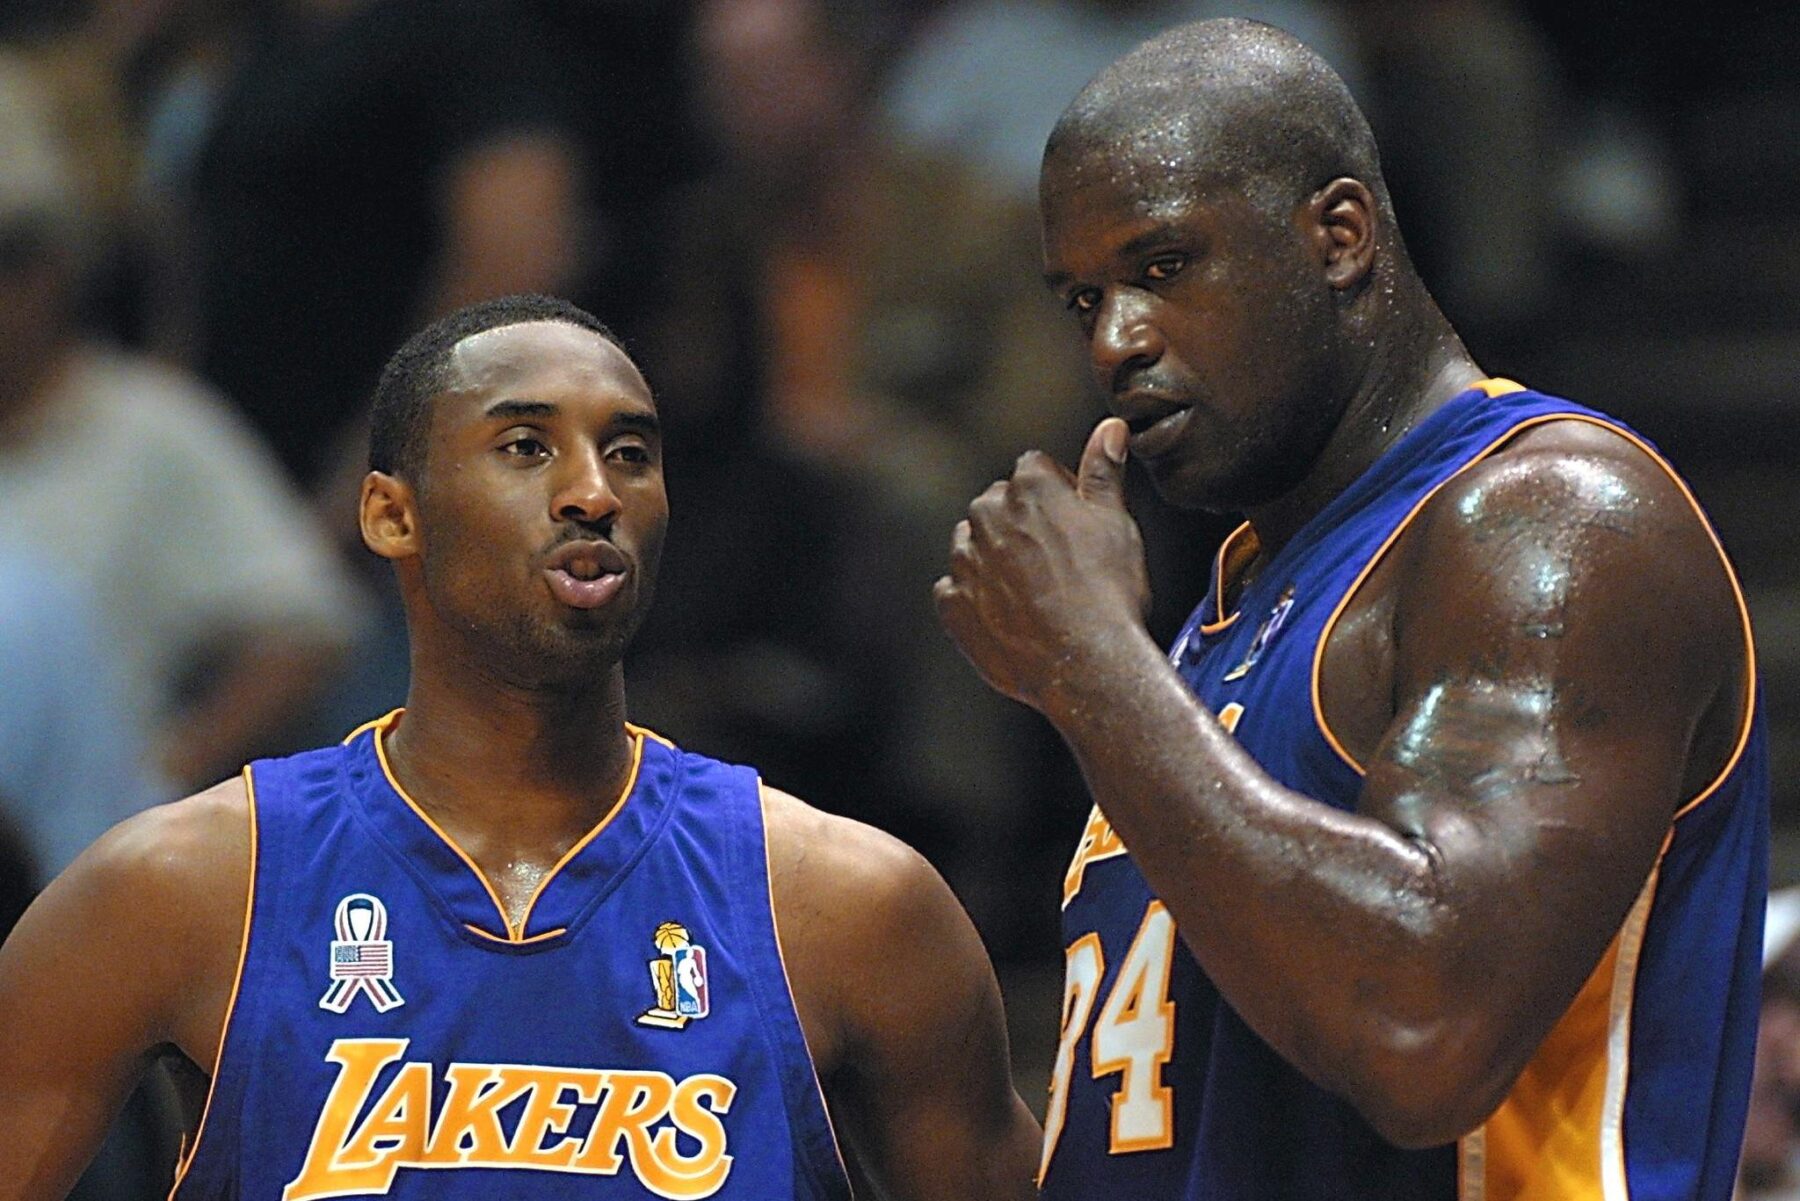 Lakers News: Shaq is right, he and Kobe would beat the 72-win Bulls